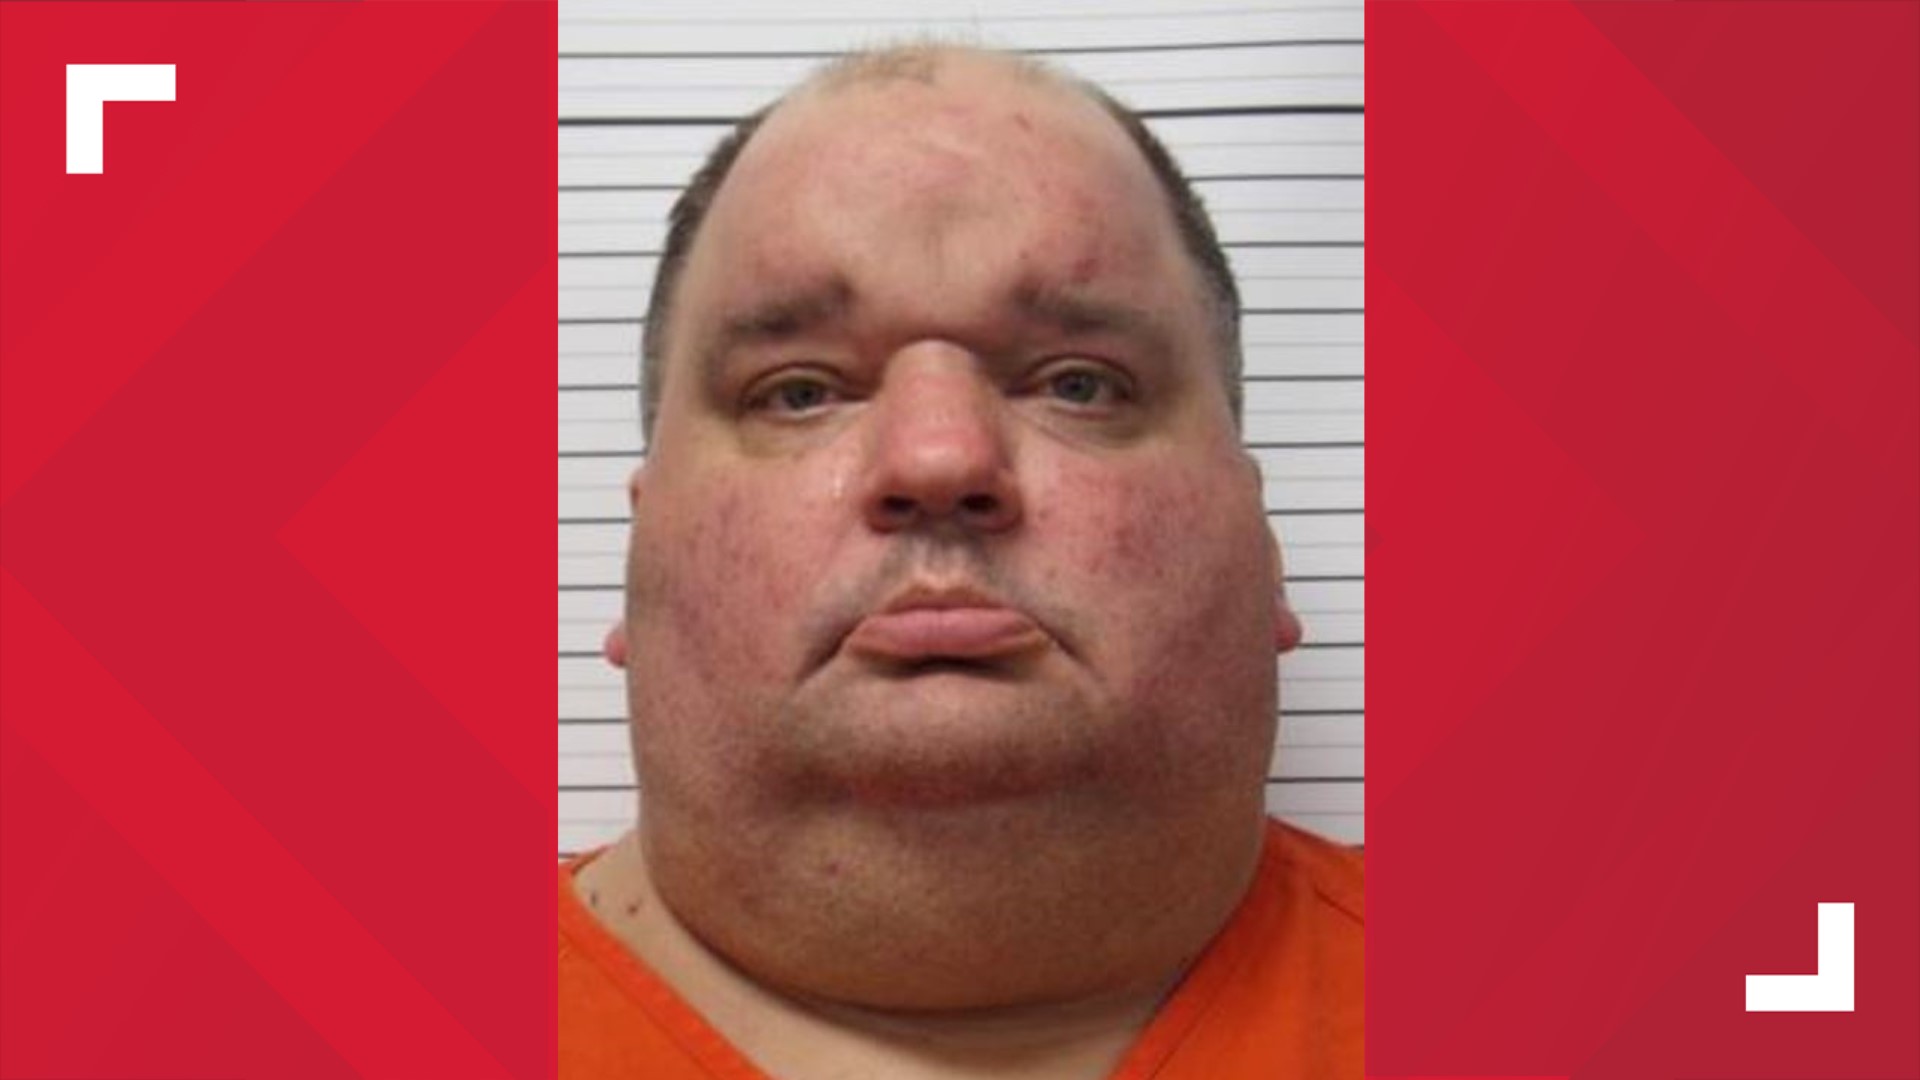 Michael Ray Stith, of Prospect, was indicted last week on seven counts of rape involving children under the age of 13.